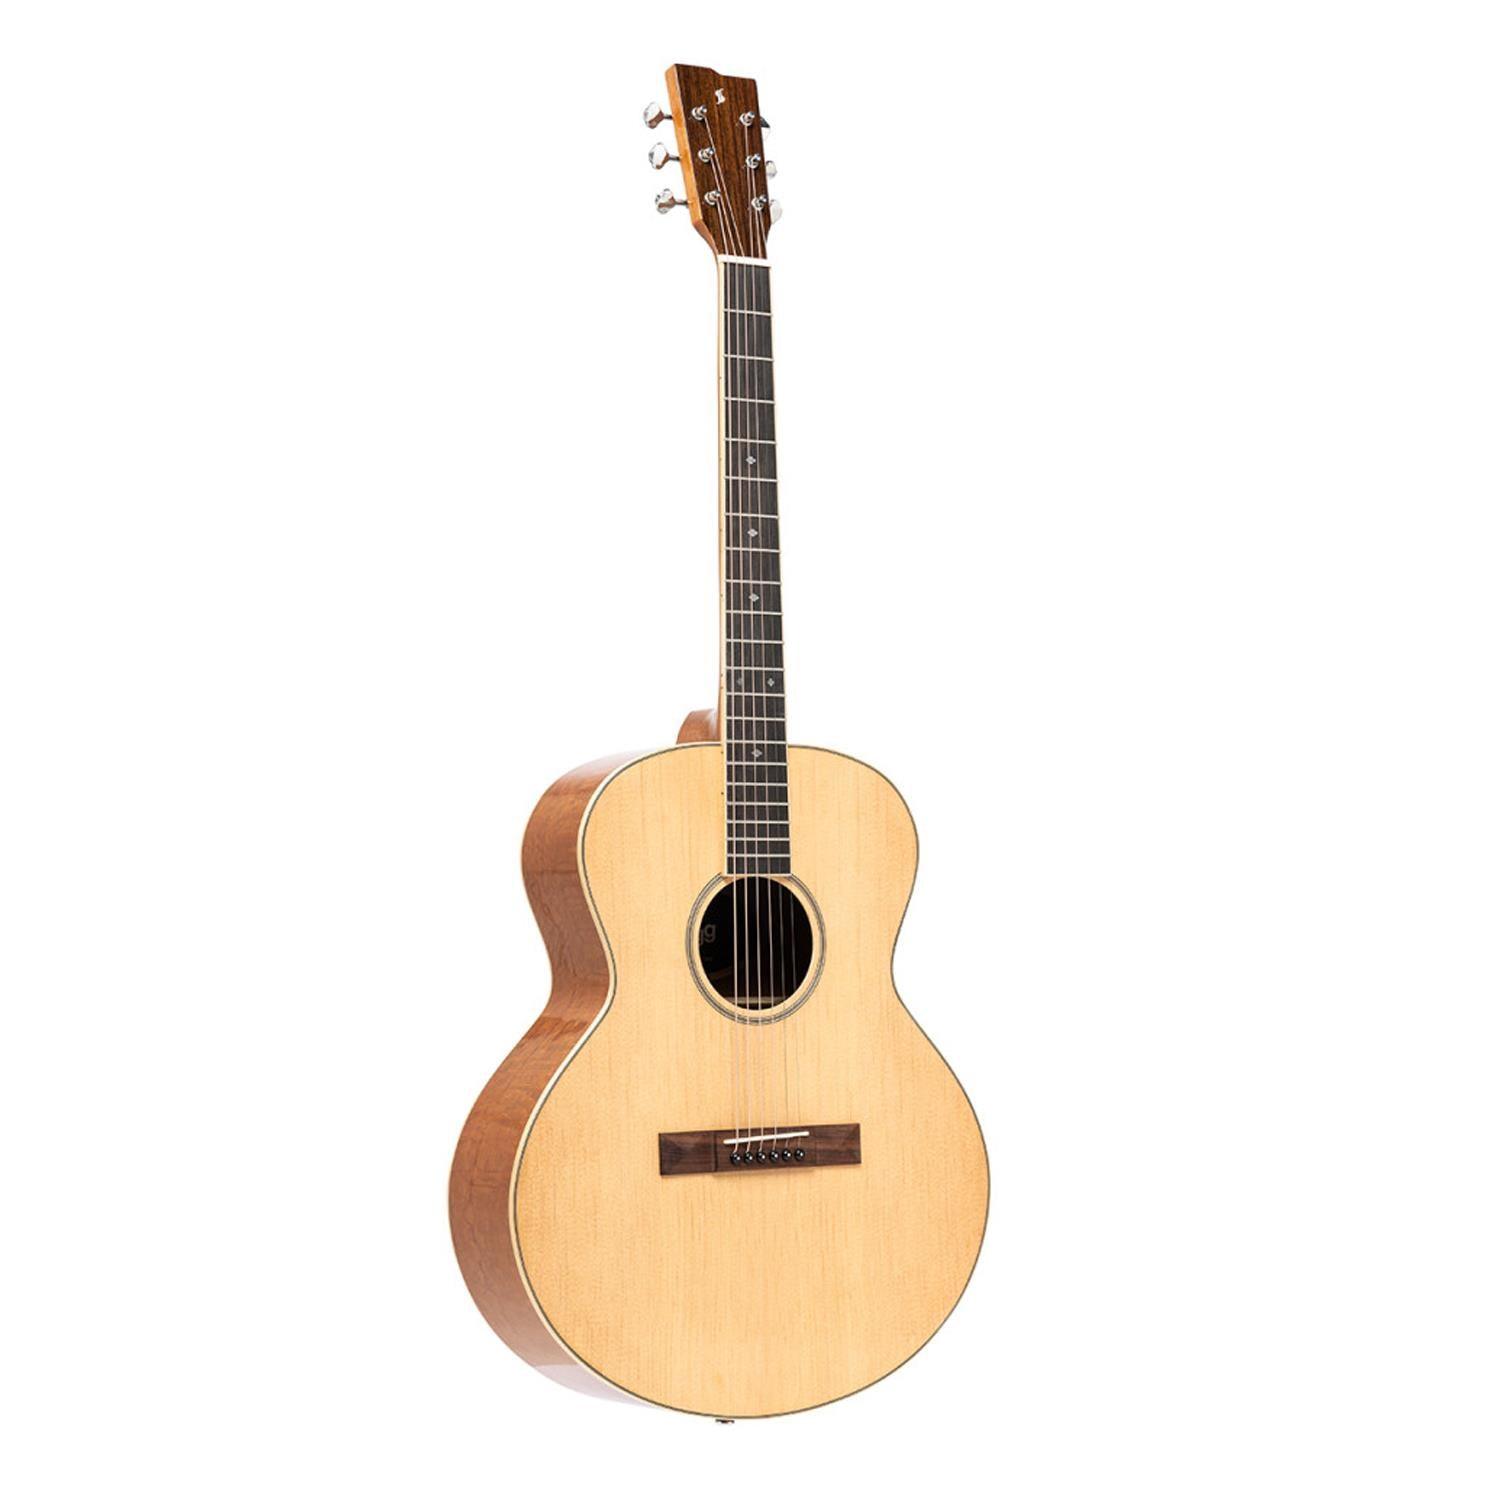 Stagg SA45 O-LW Series 45 Natural Orchestral Acoustic Guitar with Spruce Top - DY Pro Audio